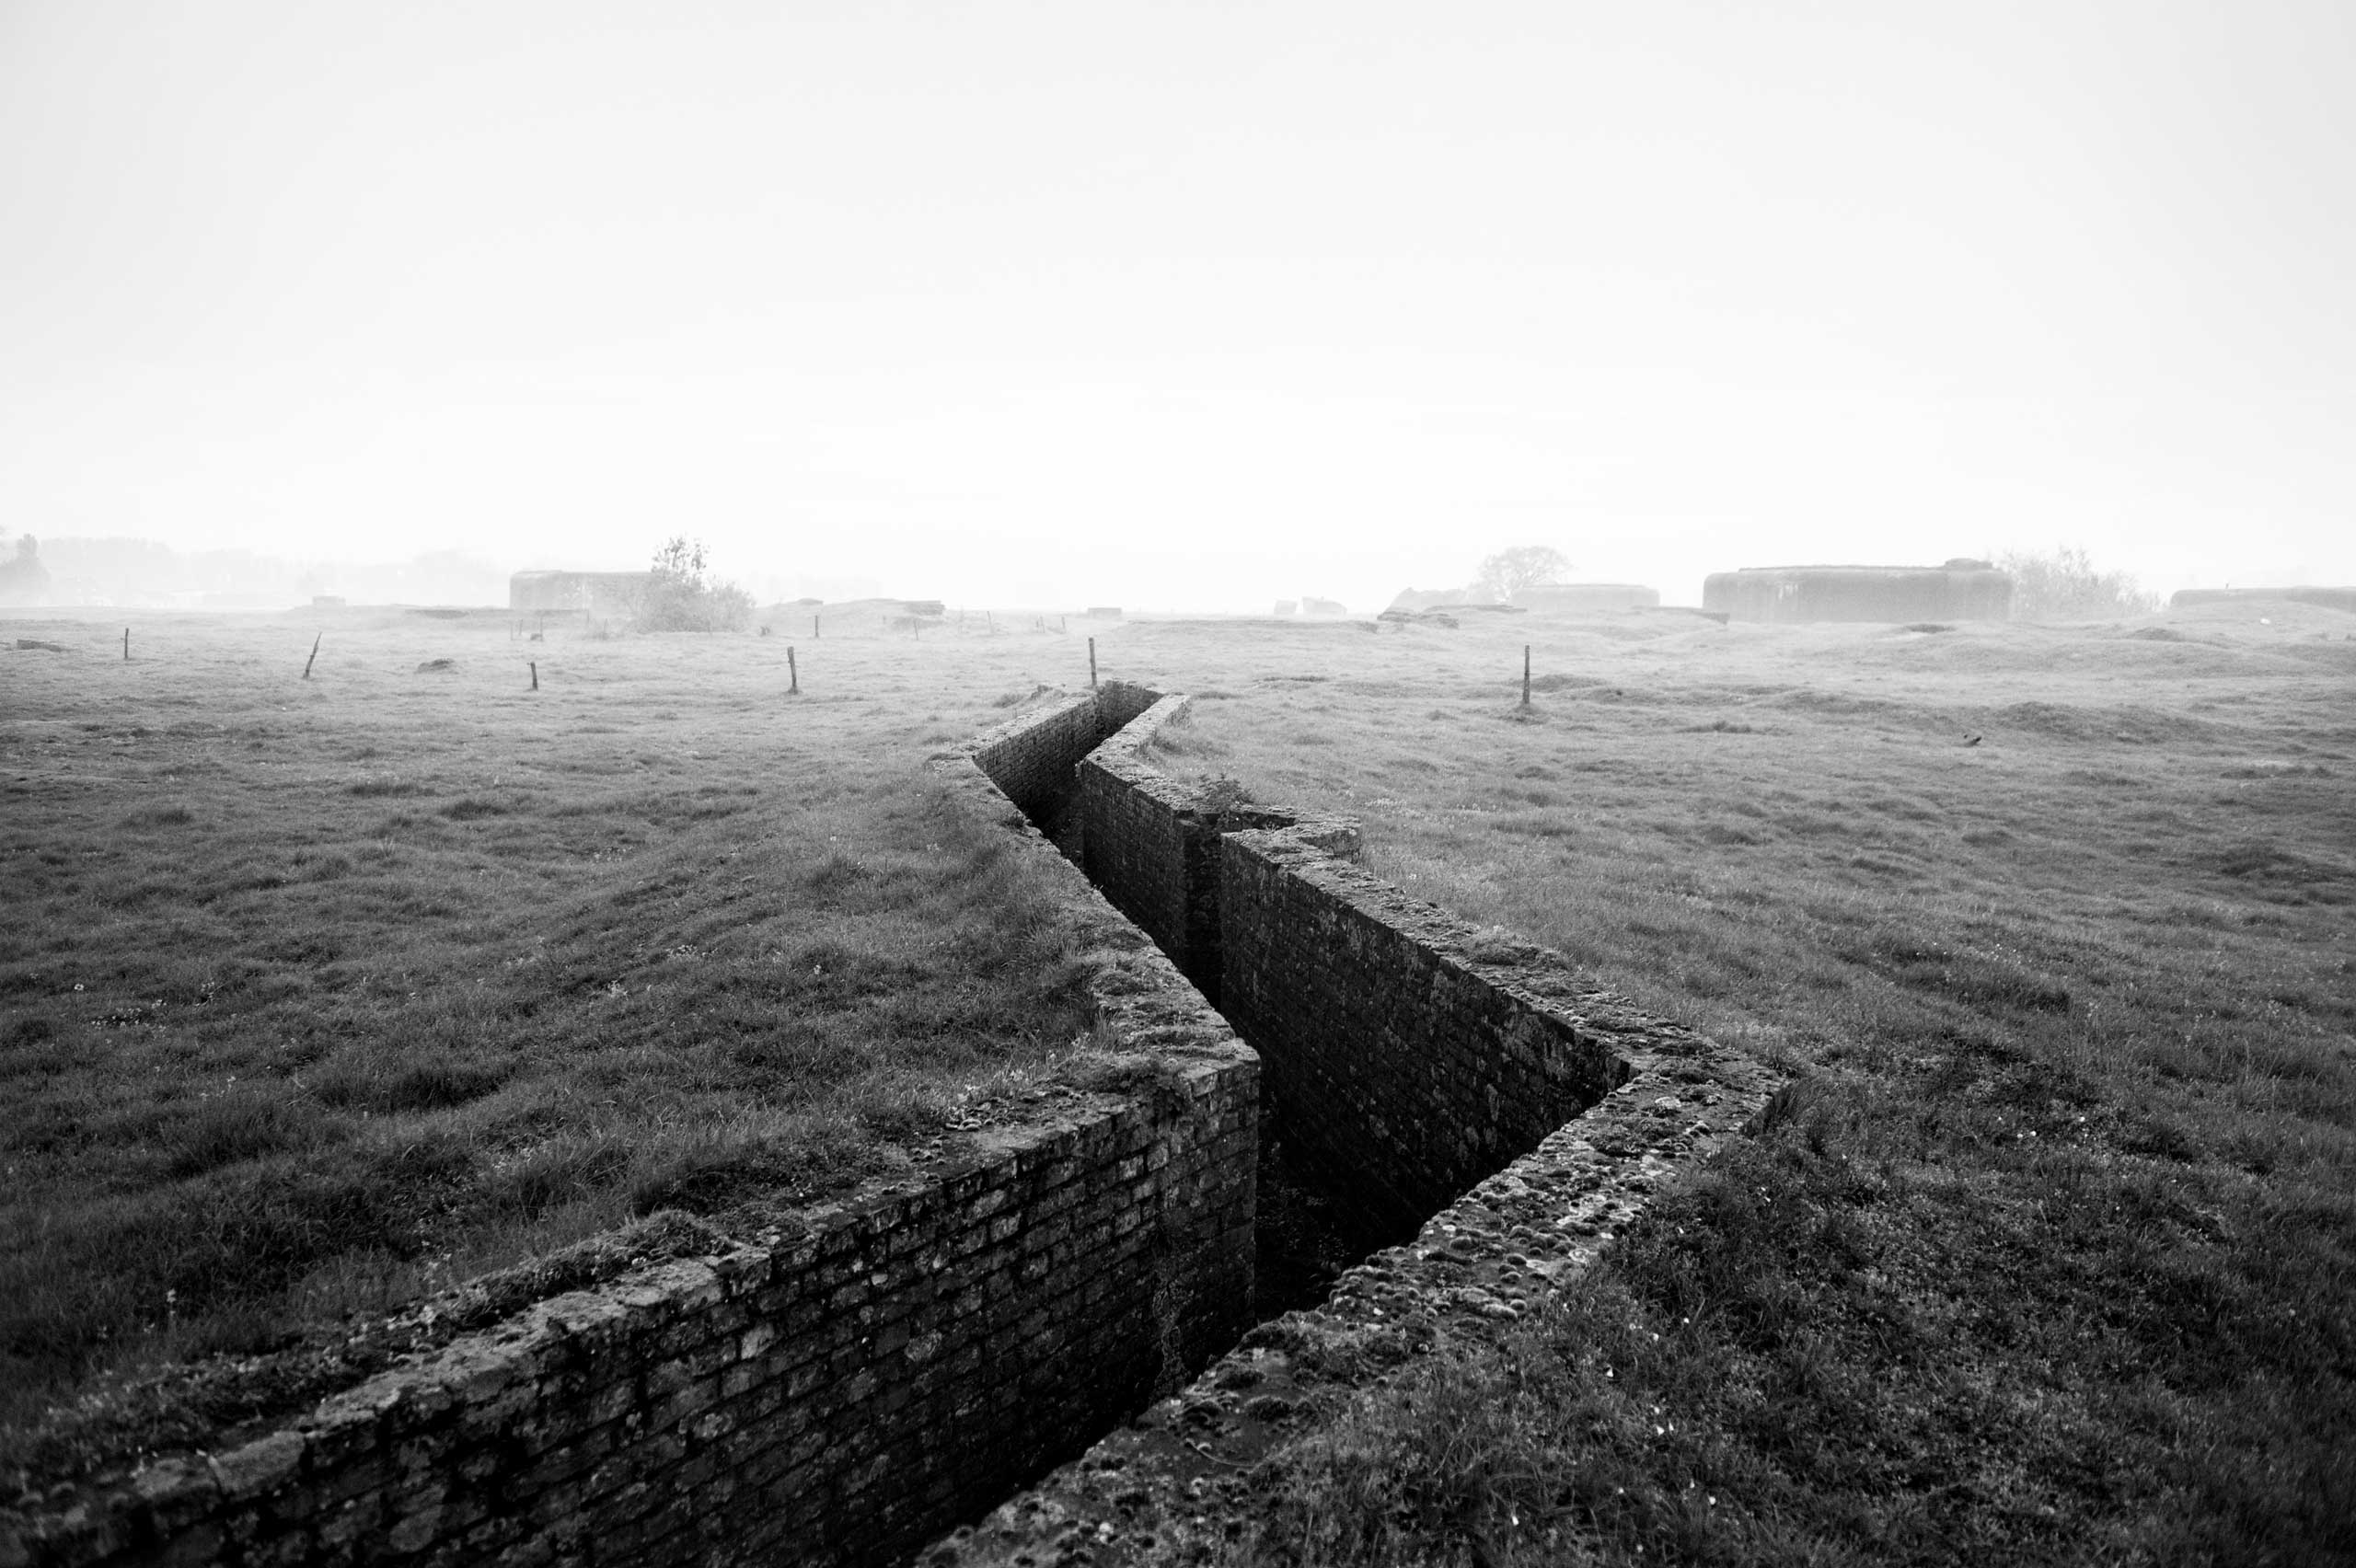 A brick trench runs through a field along the route of the Atlantic Wall (Atlantikwall in German).